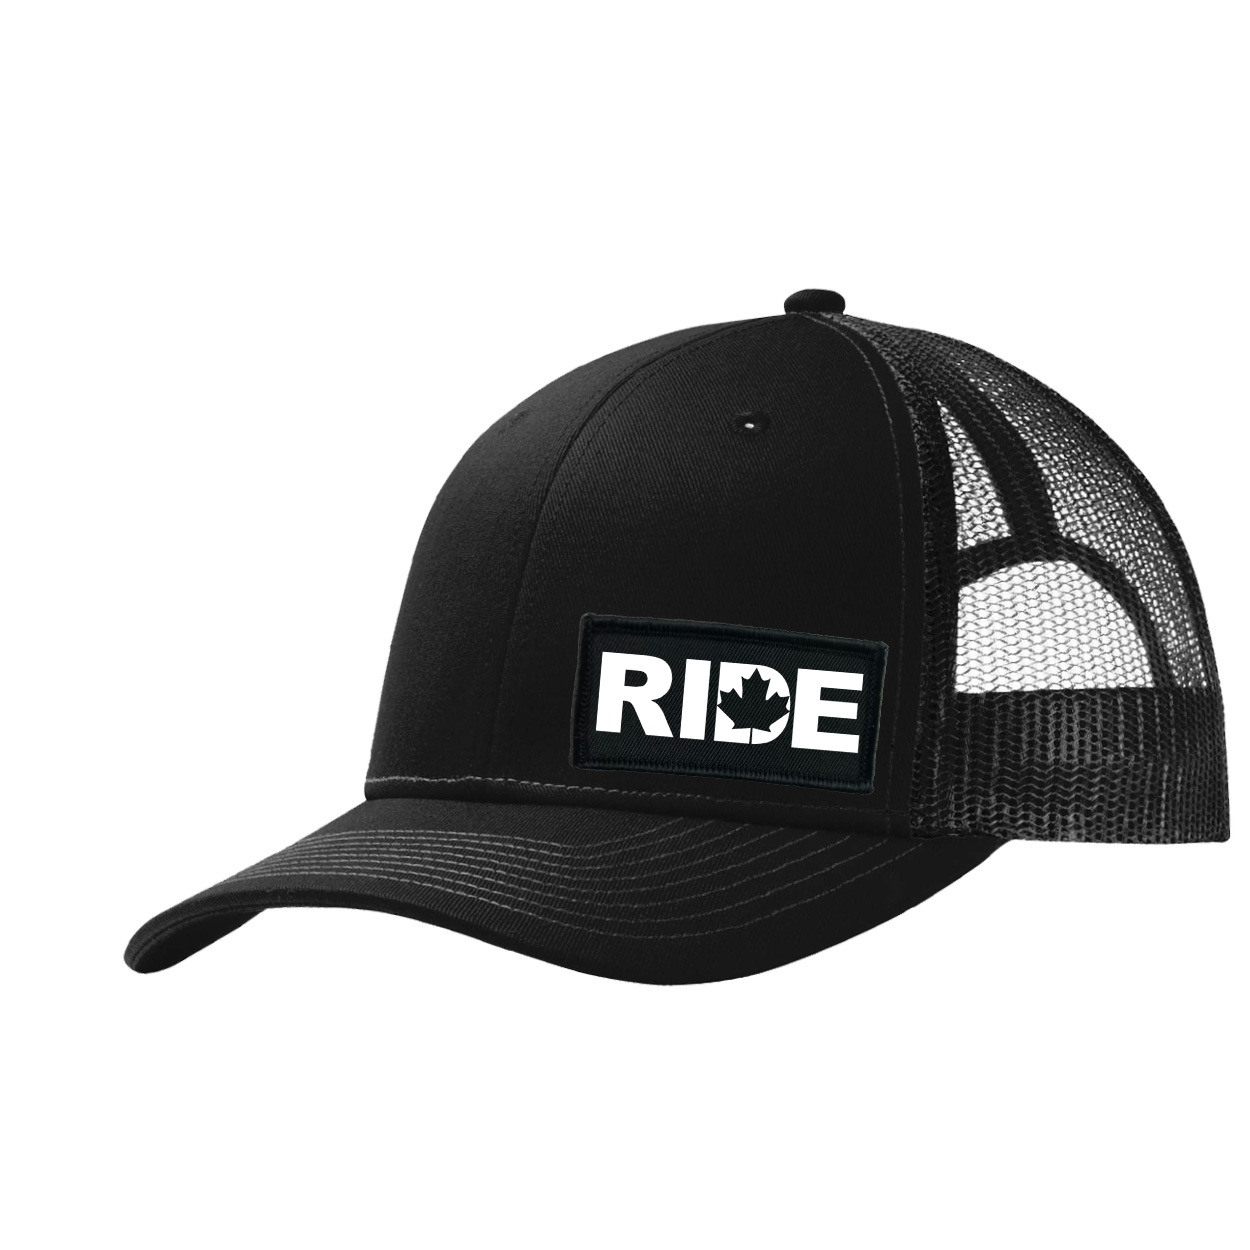 Ride Canada Night Out Woven Patch Snapback Trucker Hat Black (White Logo)